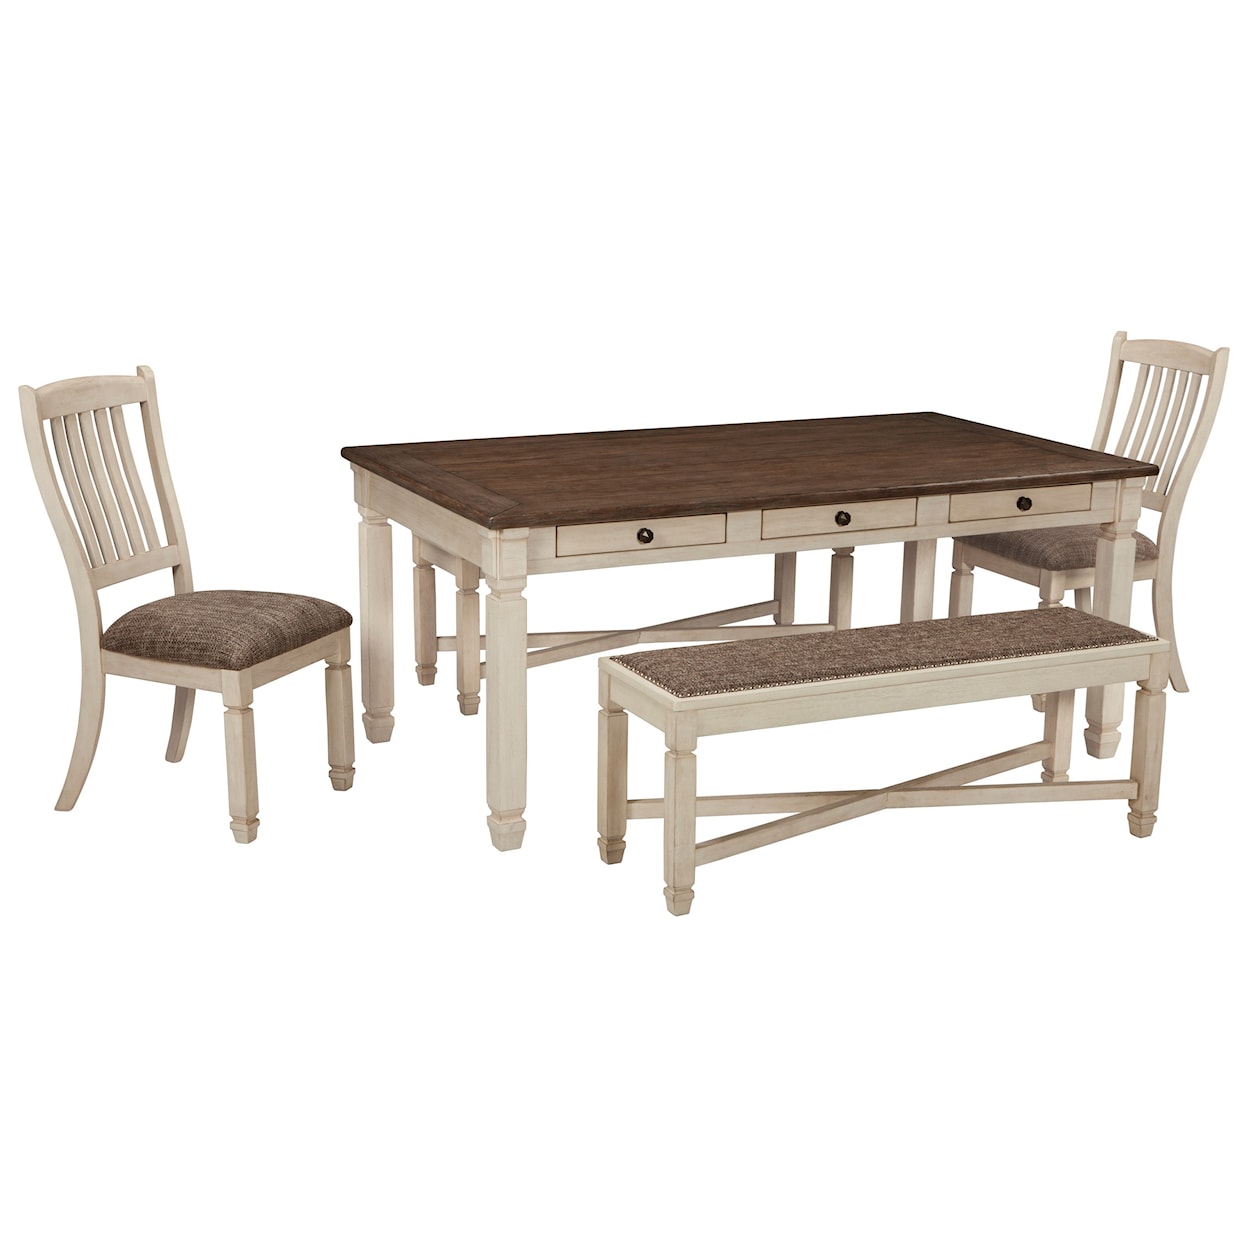 Signature Design by Ashley Furniture Bolanburg Table and Chair Set with Bench